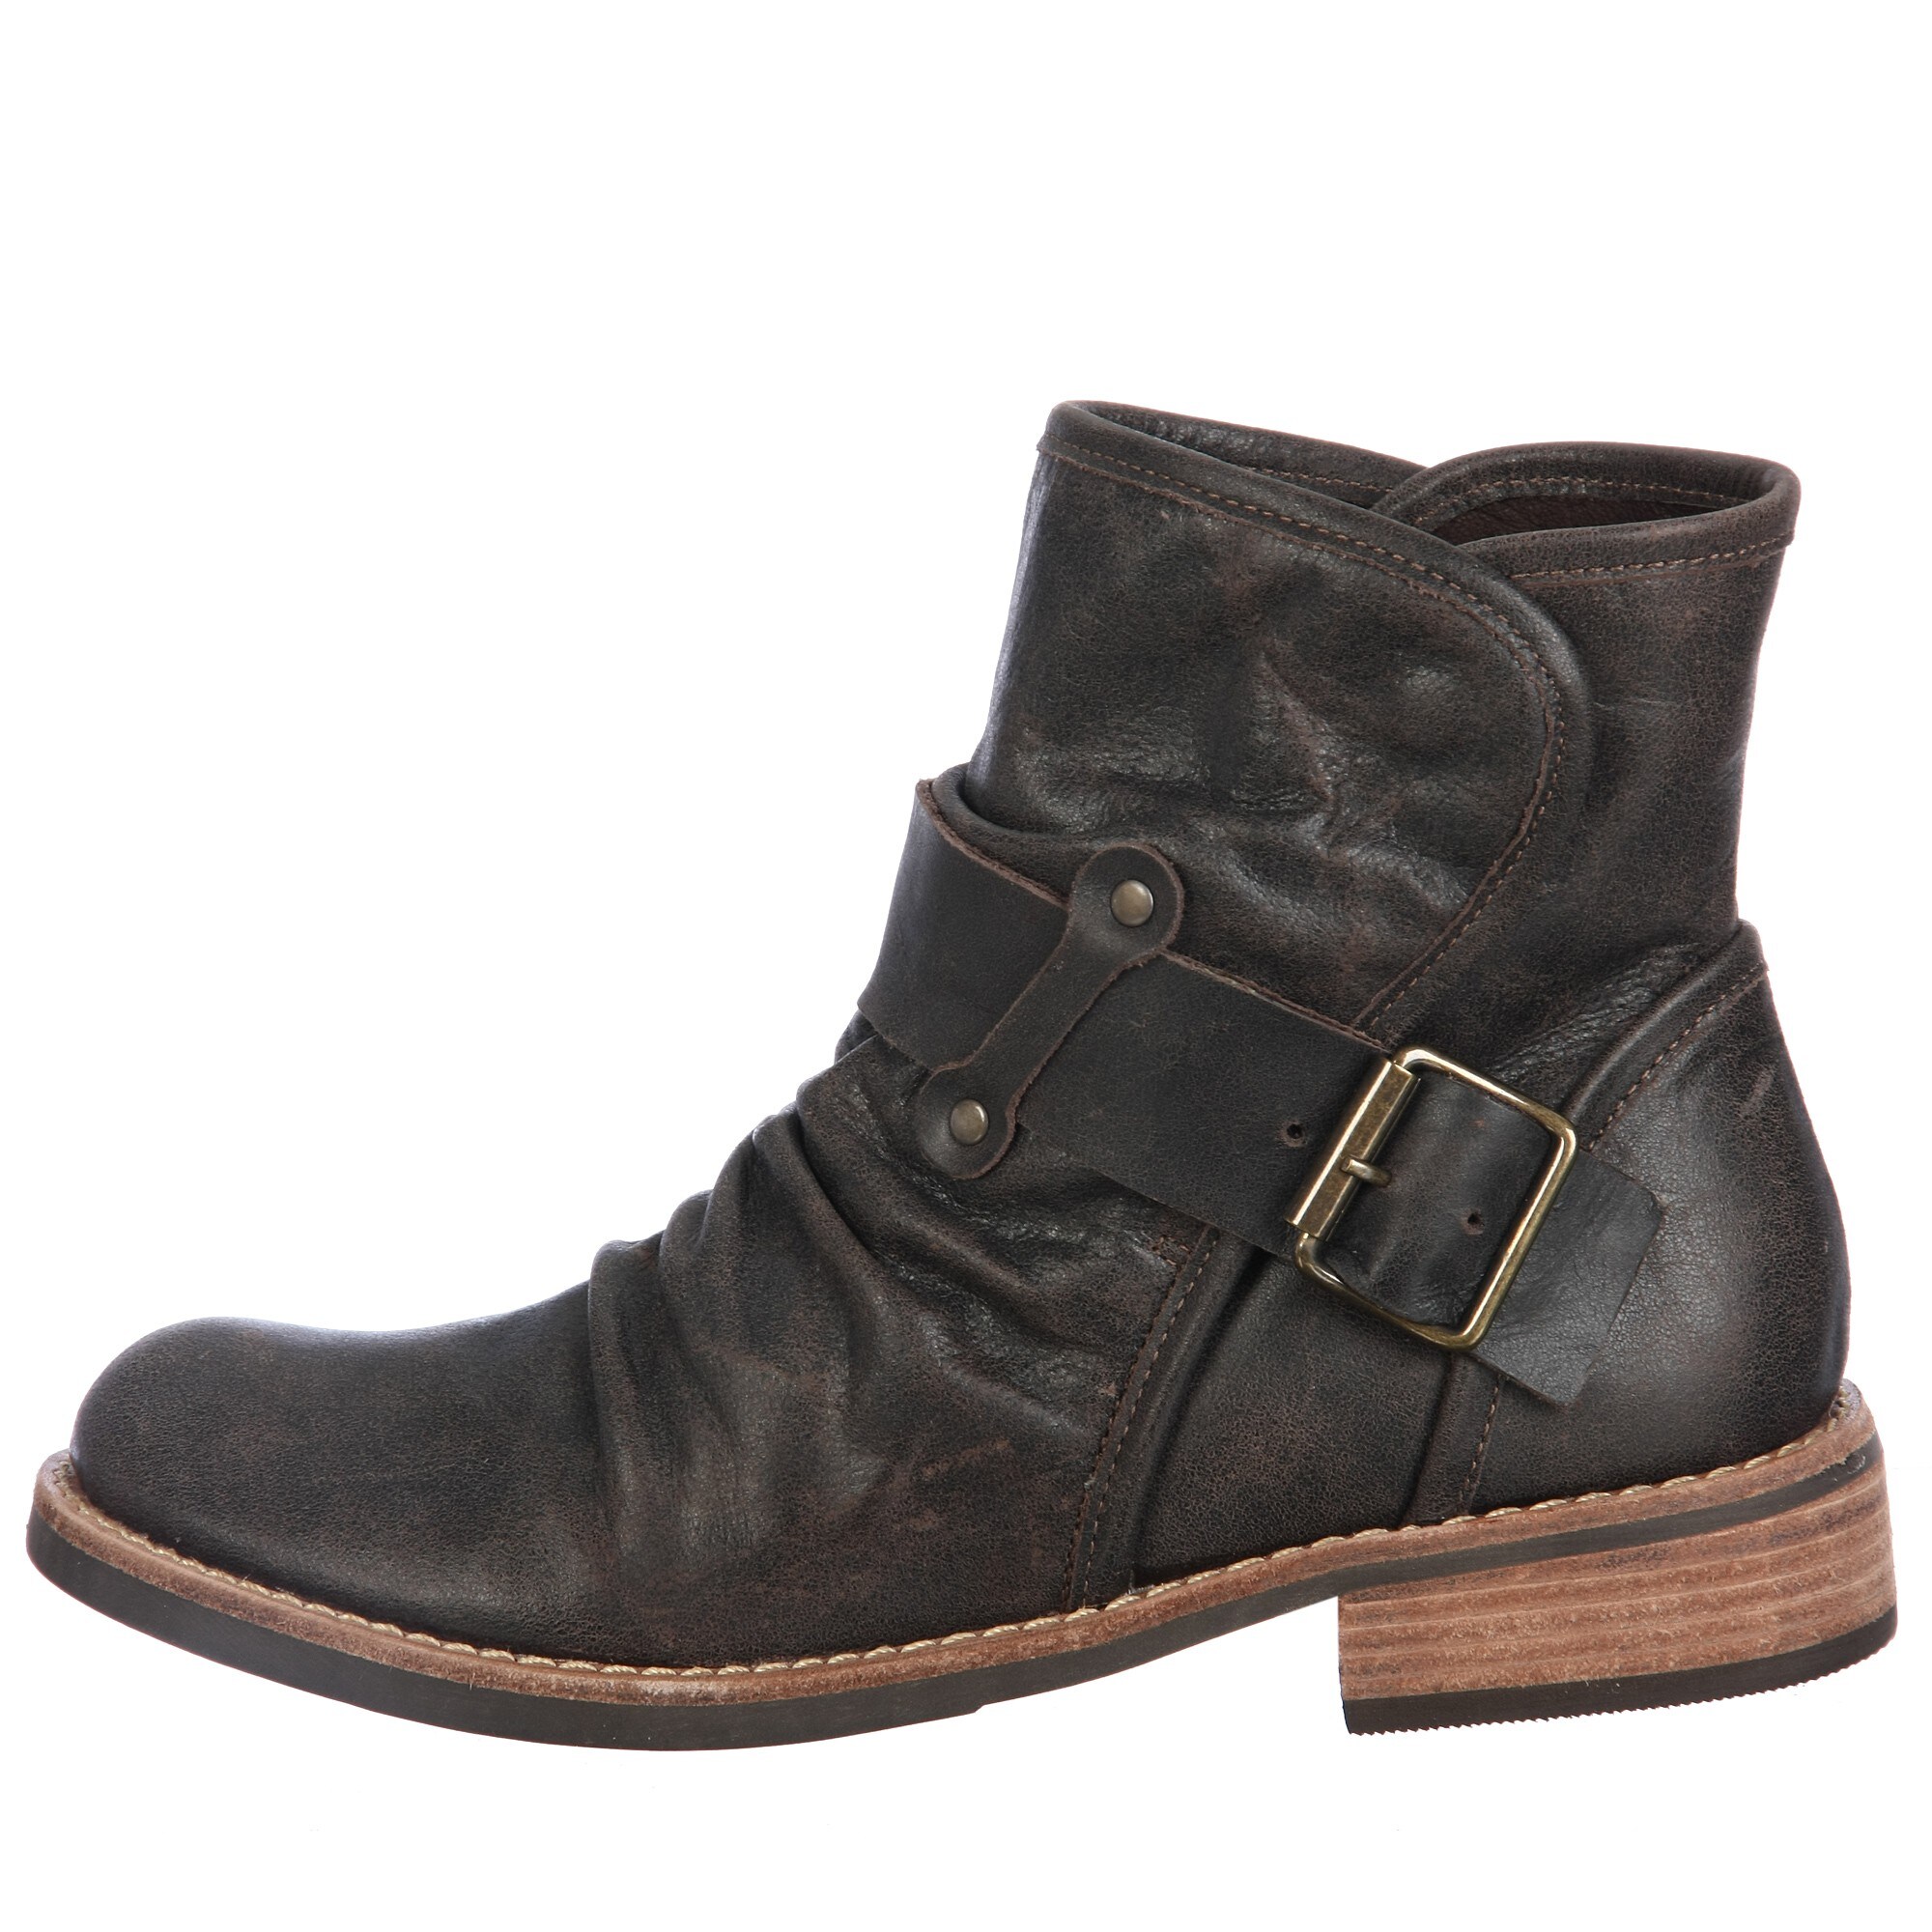 buckle boots sale